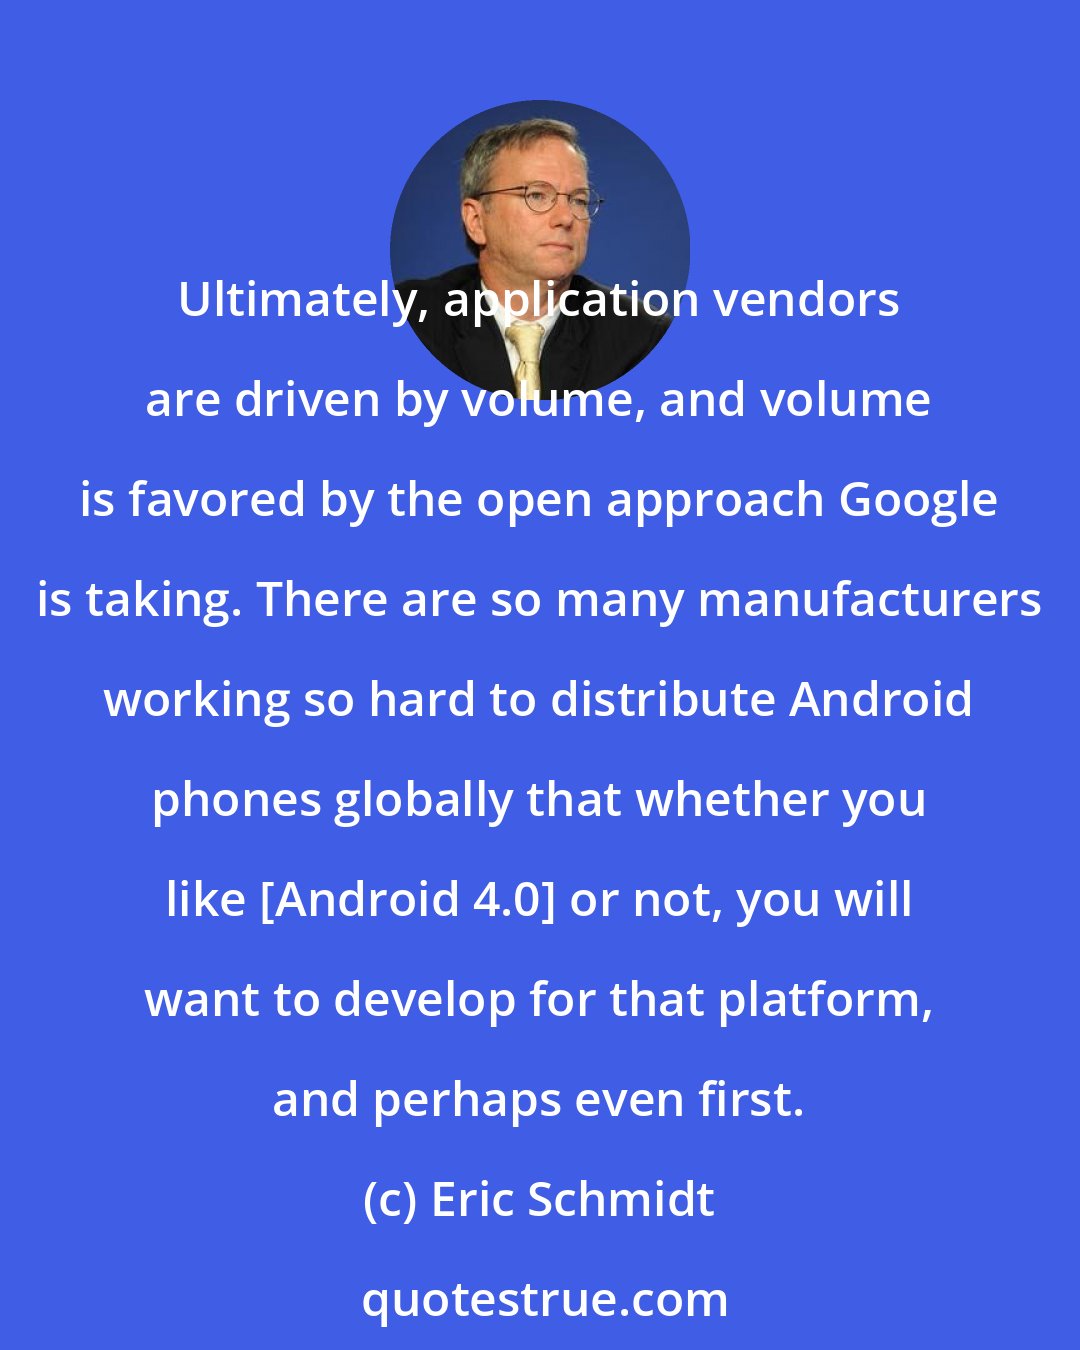 Eric Schmidt: Ultimately, application vendors are driven by volume, and volume is favored by the open approach Google is taking. There are so many manufacturers working so hard to distribute Android phones globally that whether you like [Android 4.0] or not, you will want to develop for that platform, and perhaps even first.